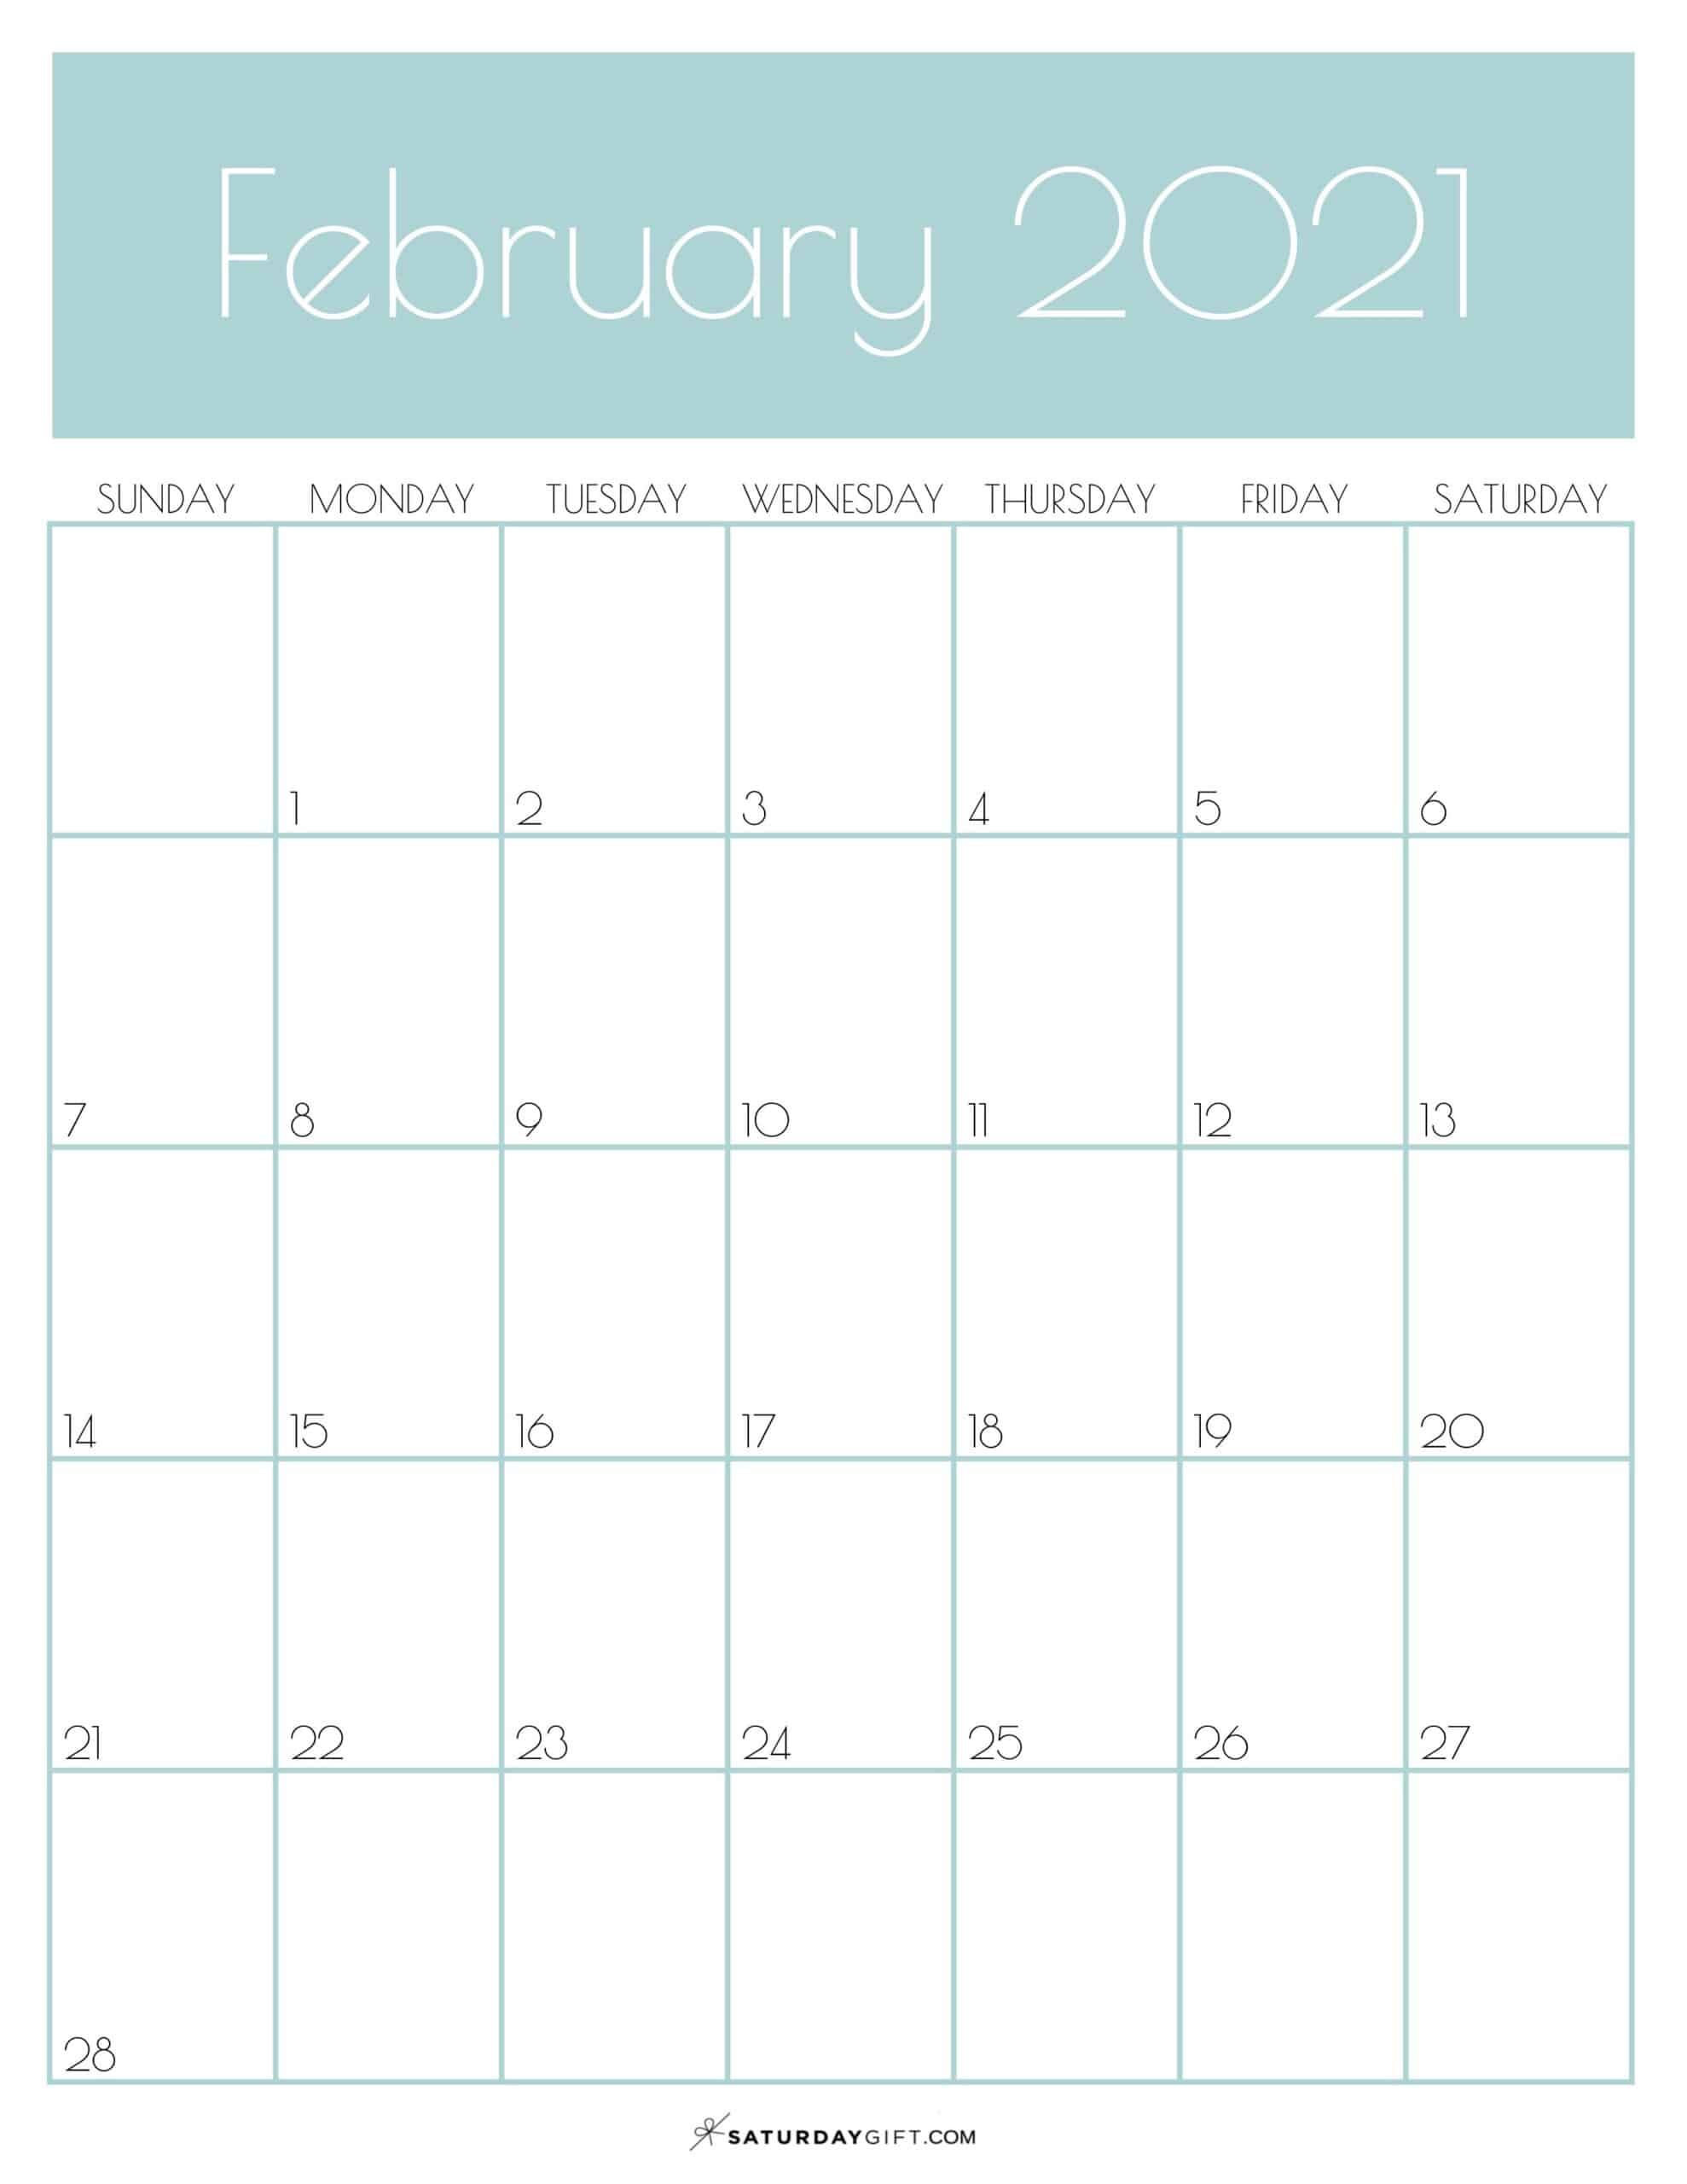 Featured image of post February Calendars 2021 - You can save your time and use the online calendar editor canva which has a lot of.